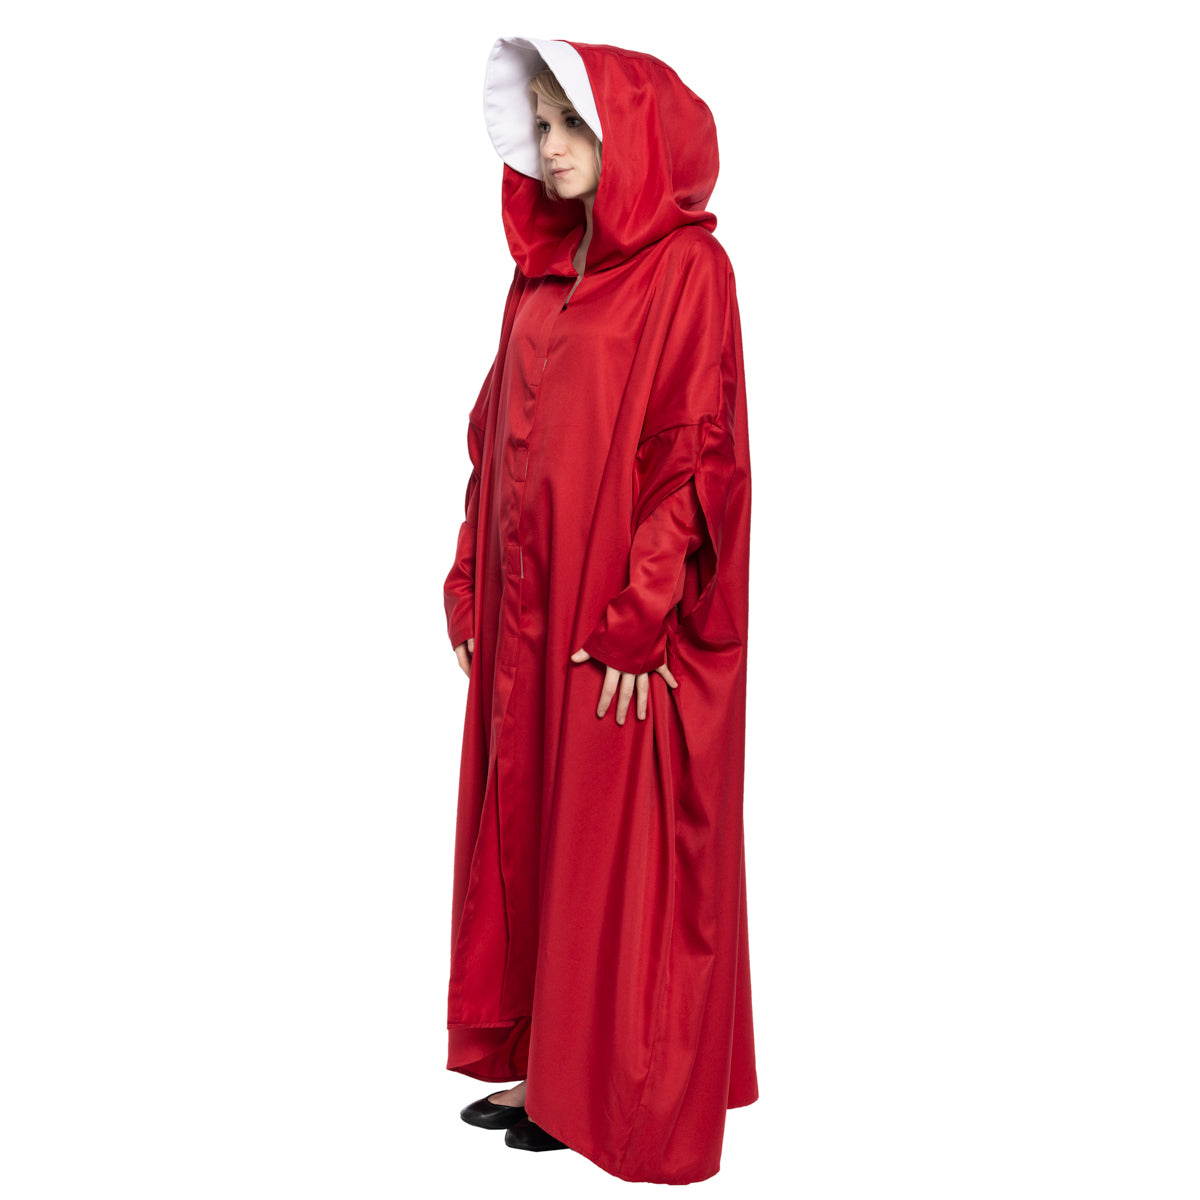 The Handmaid's Tale Red Cloak and White Hat Costume Full